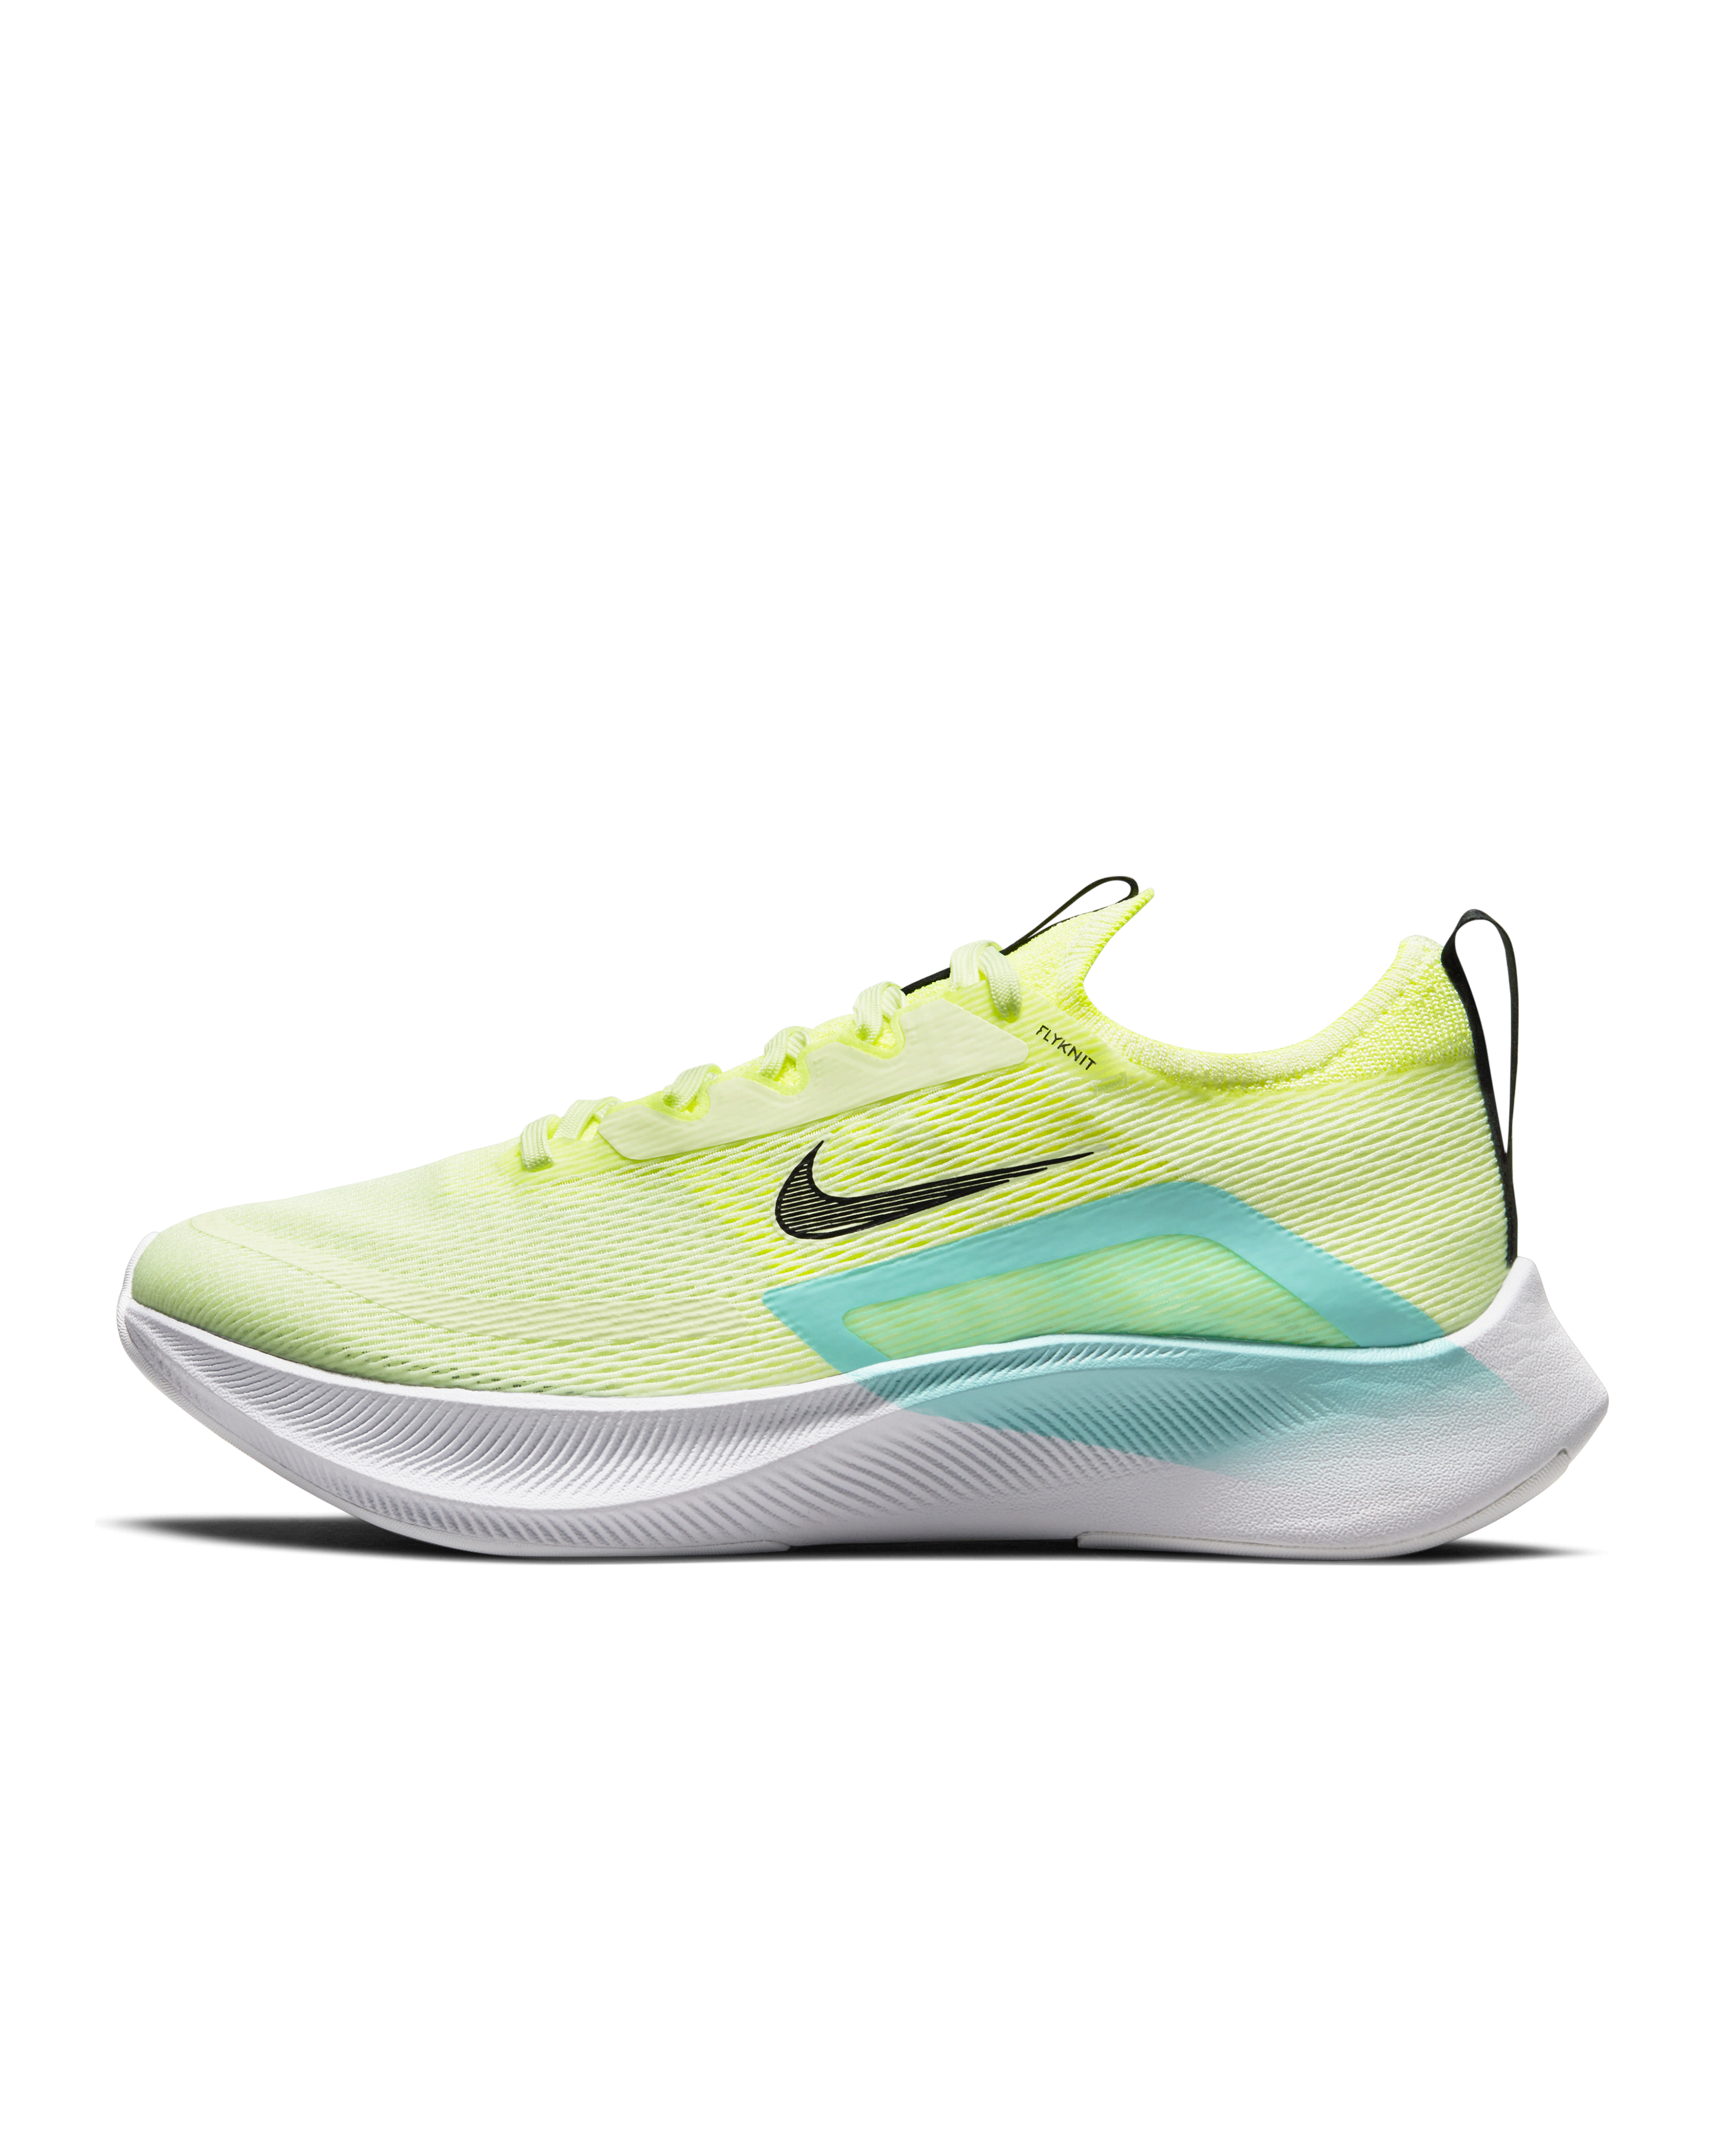 butterfly Pedestrian Danube 10 Best Nike Running Shoes For Women, According To Running Coaches